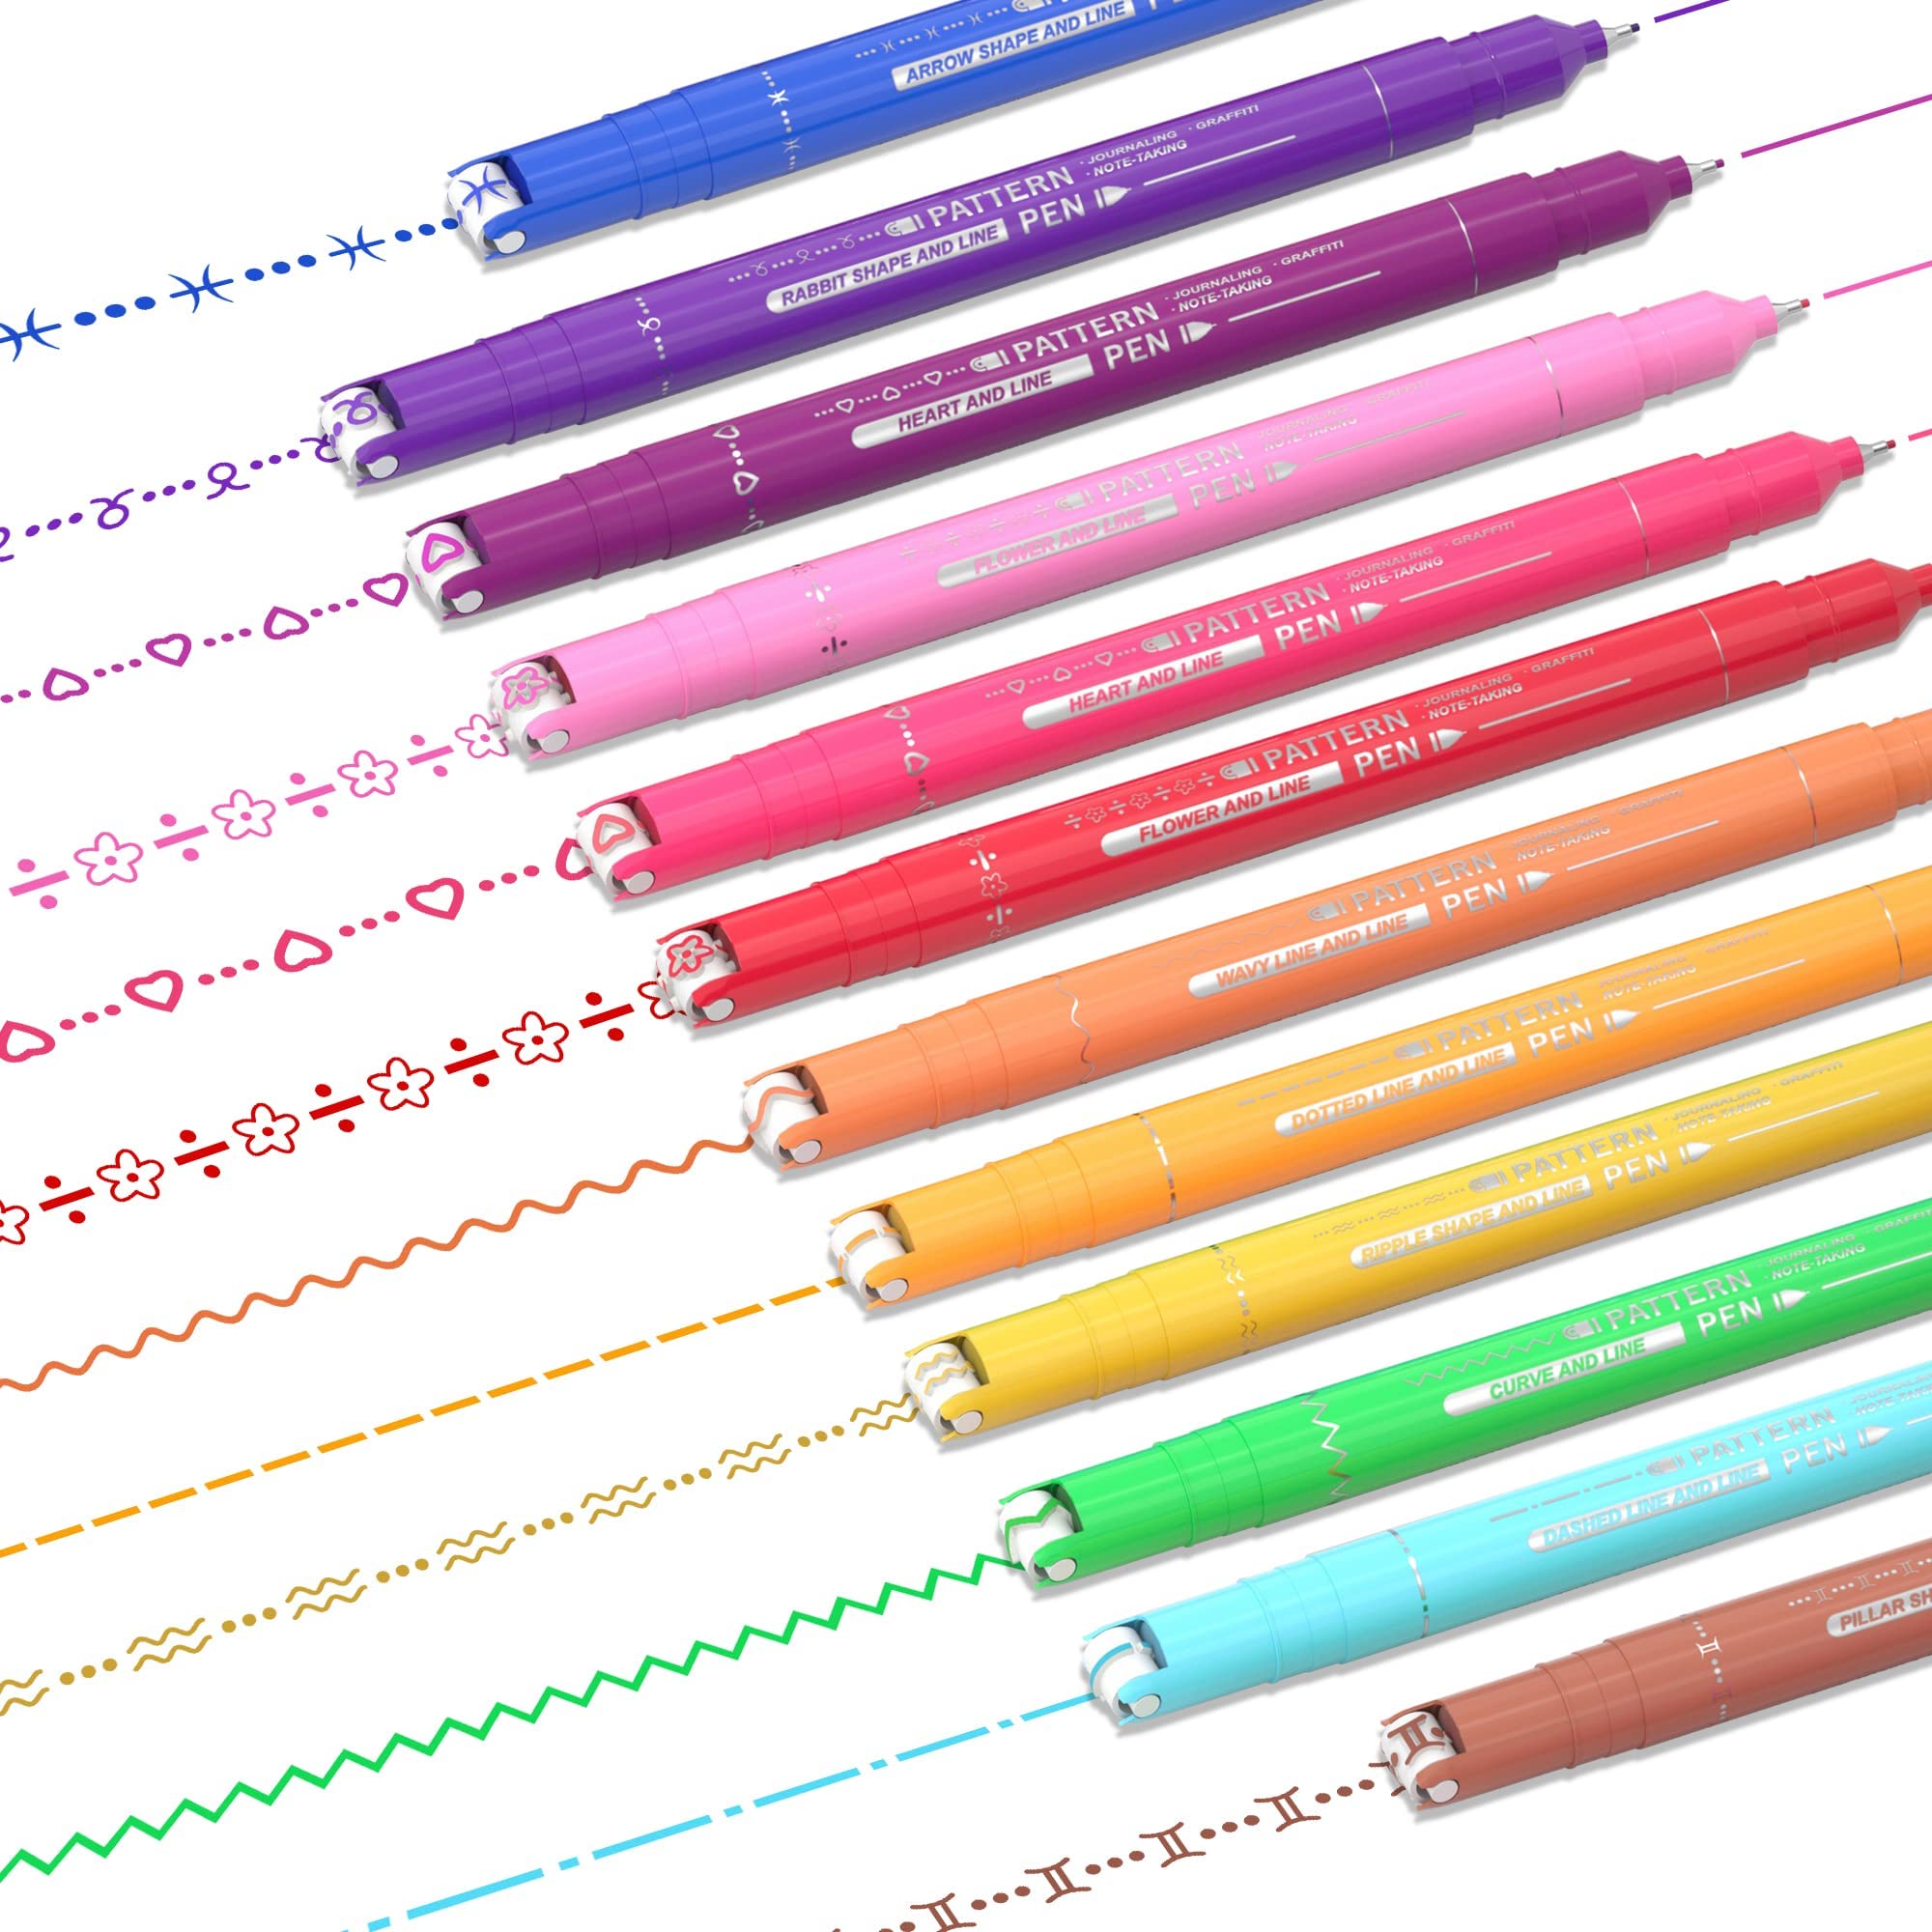 Curves Highlighter Pen Set 6 Colored Curves Shapes Journal Planner Pens  With Fine Tips Journaling Outline Pens Cool Pen For Kids - Highlighters -  AliExpress